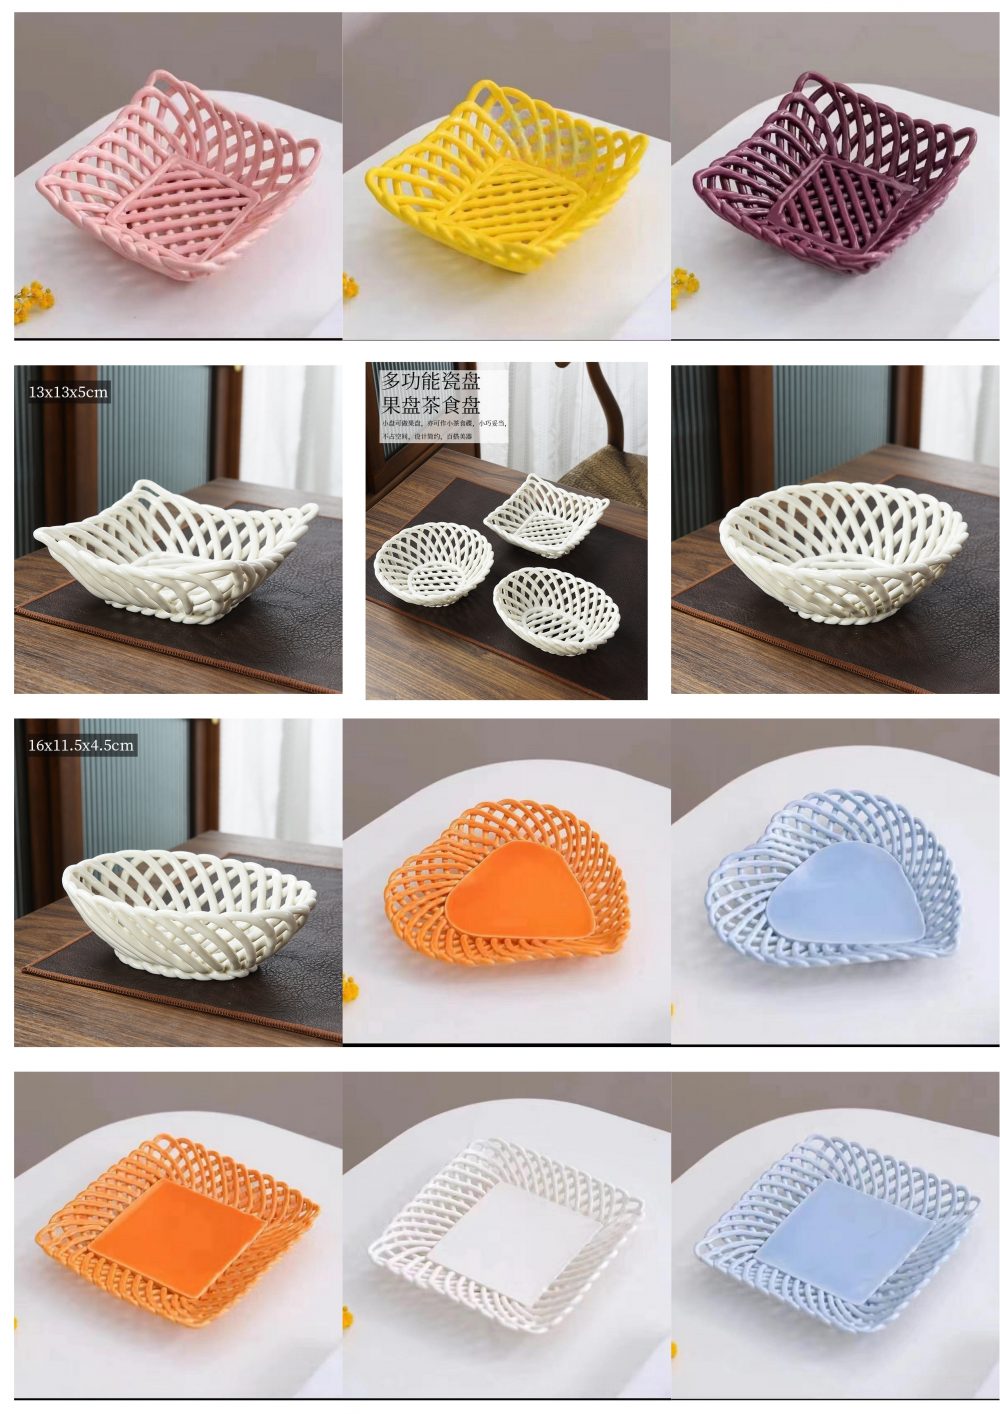 Colorful preparation of ceramic products